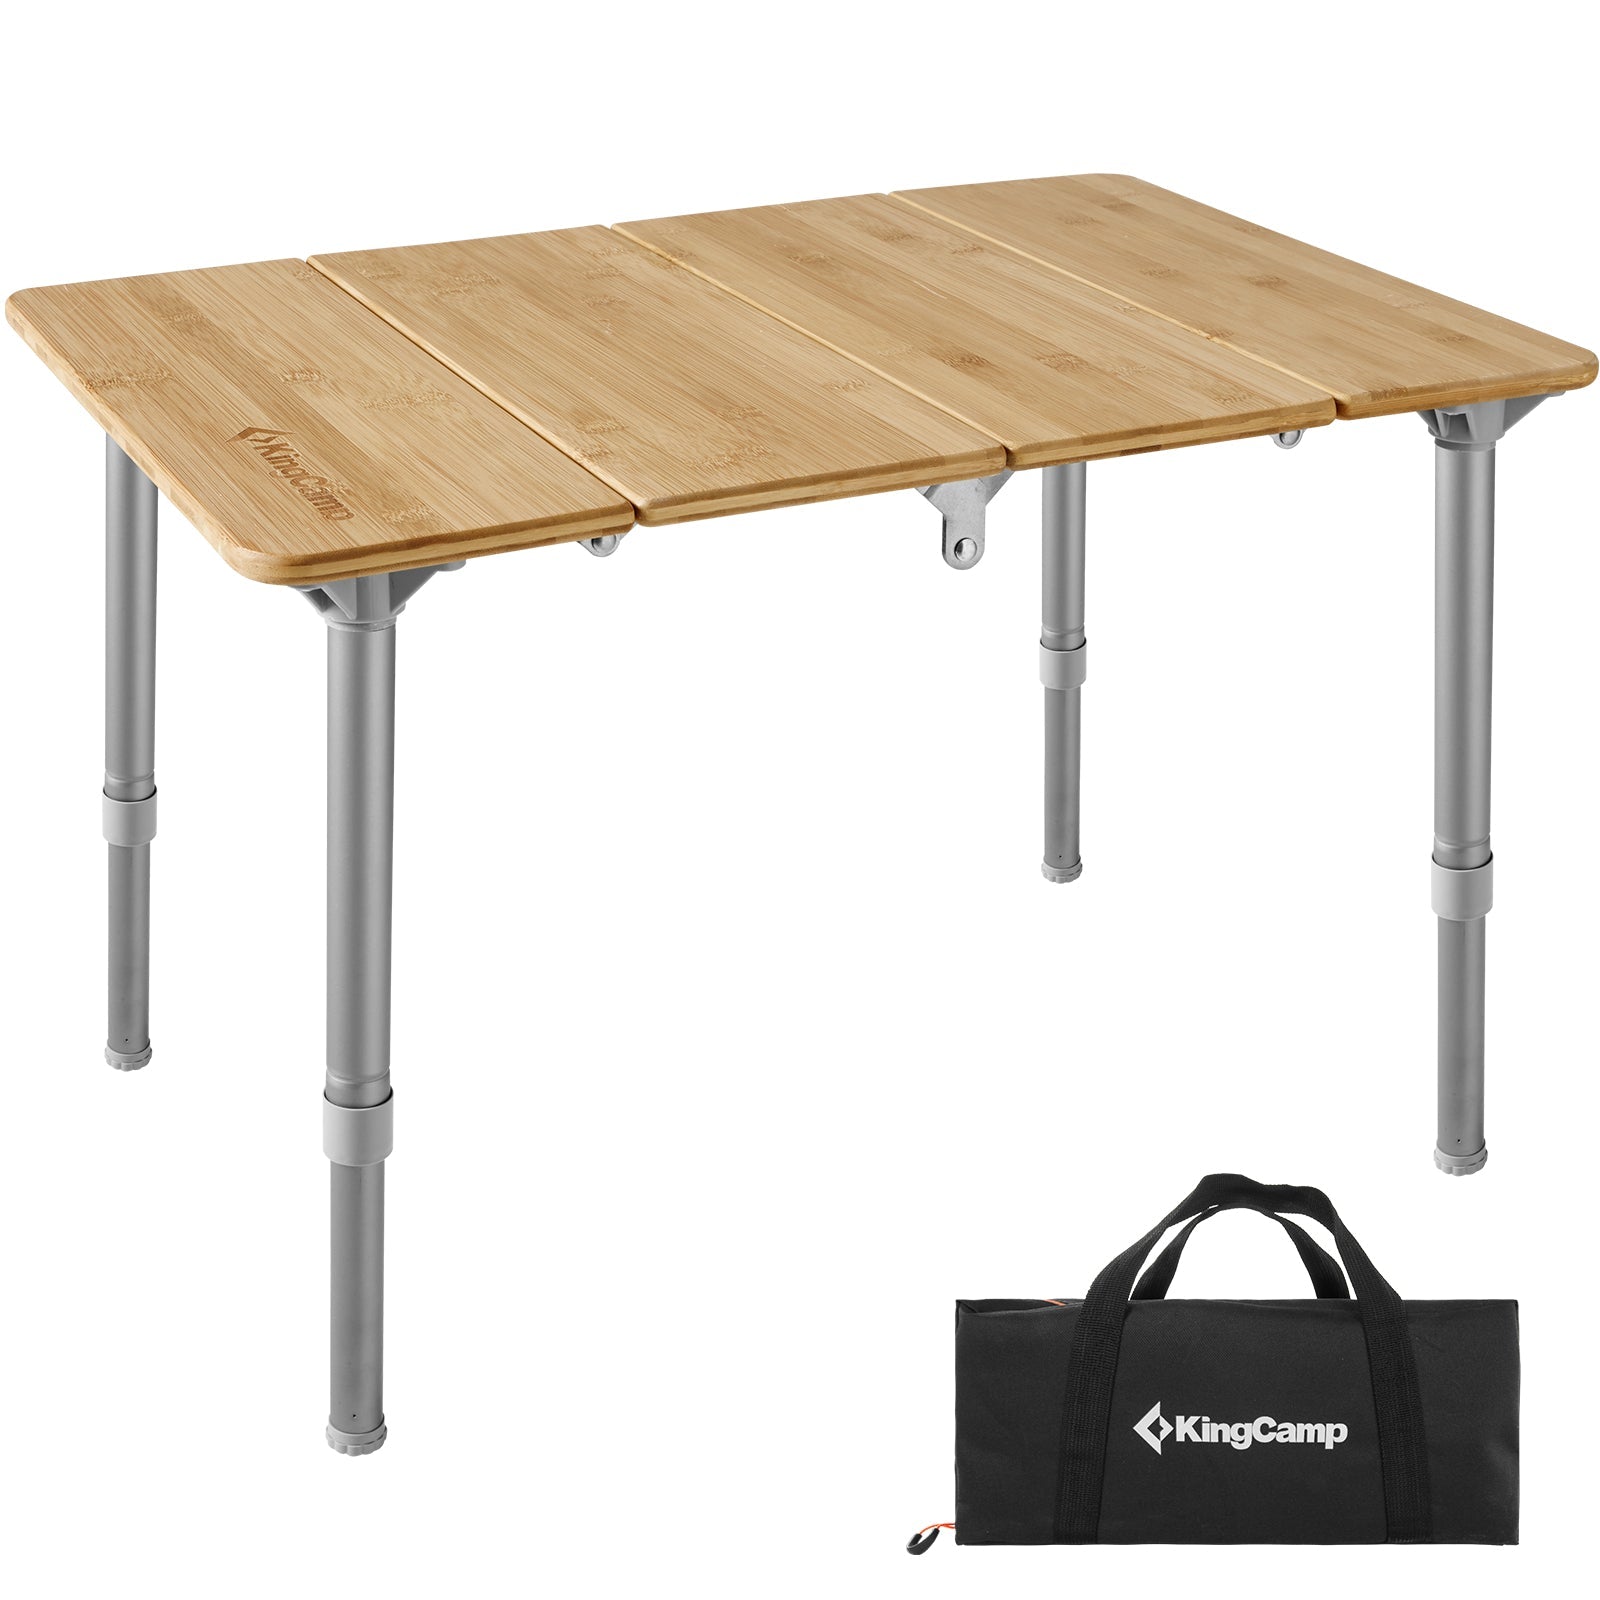 Now Buy KingCamp Bamboo Folding Adjustable Height Tables – KingCamp Outdoors